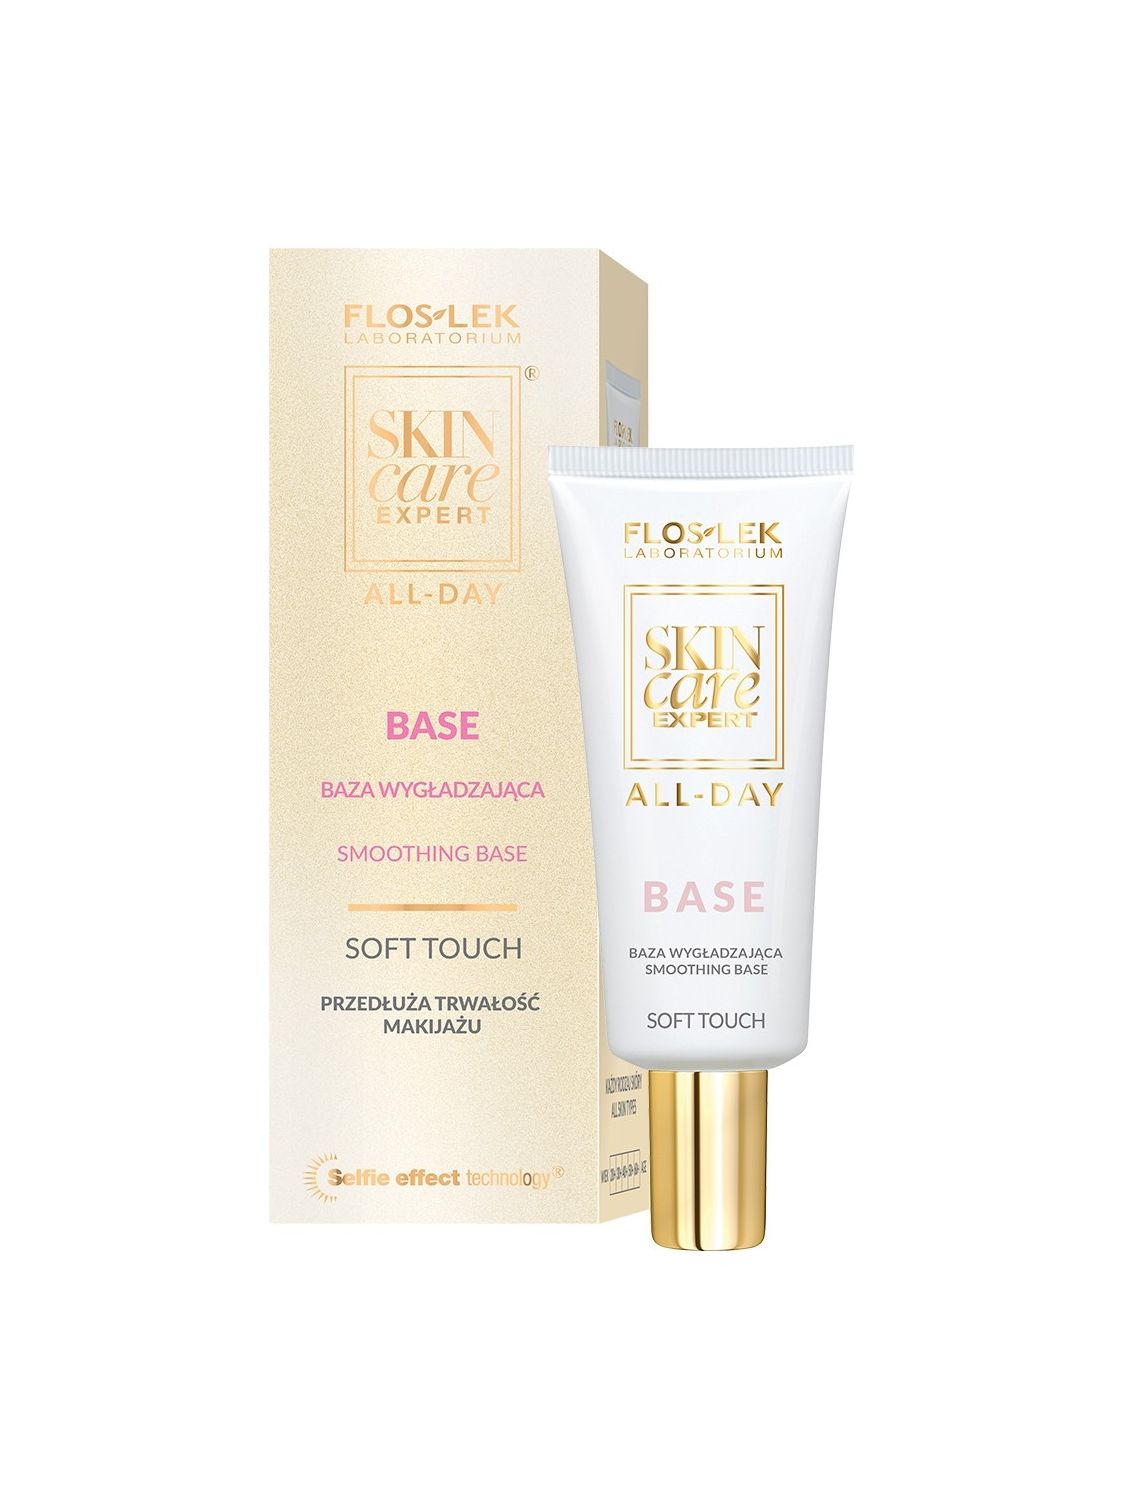 SKIN CARE EXPERT® ALL-DAY BASE Smoothing base SOFT TOUCH - 40 ml - Floslek